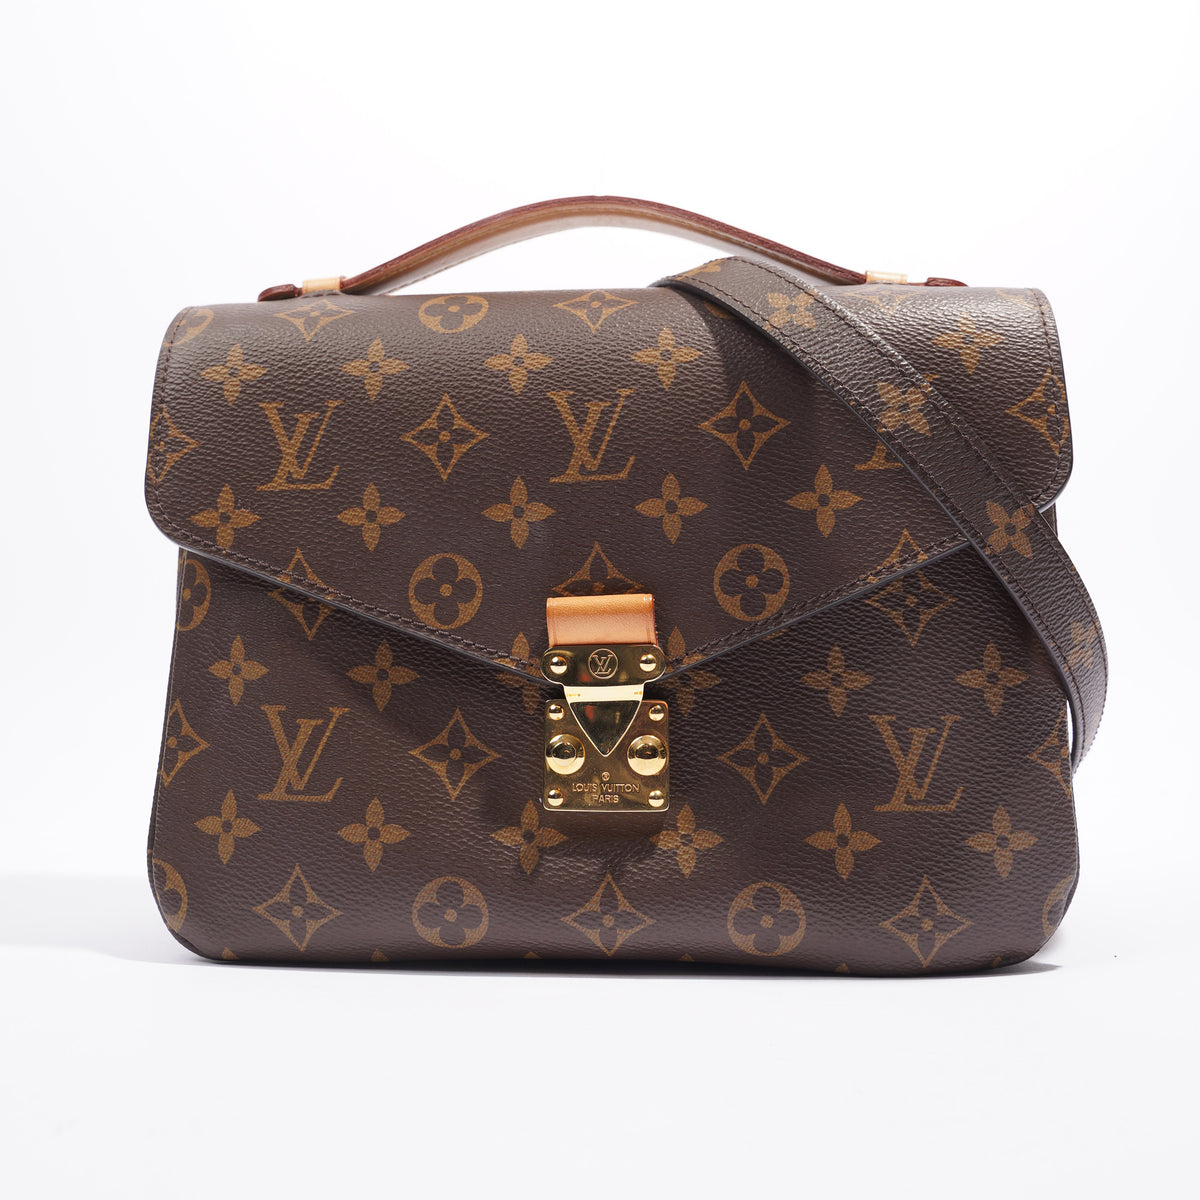 LV METIS WALLET WITH BOX AND DUSTBAG